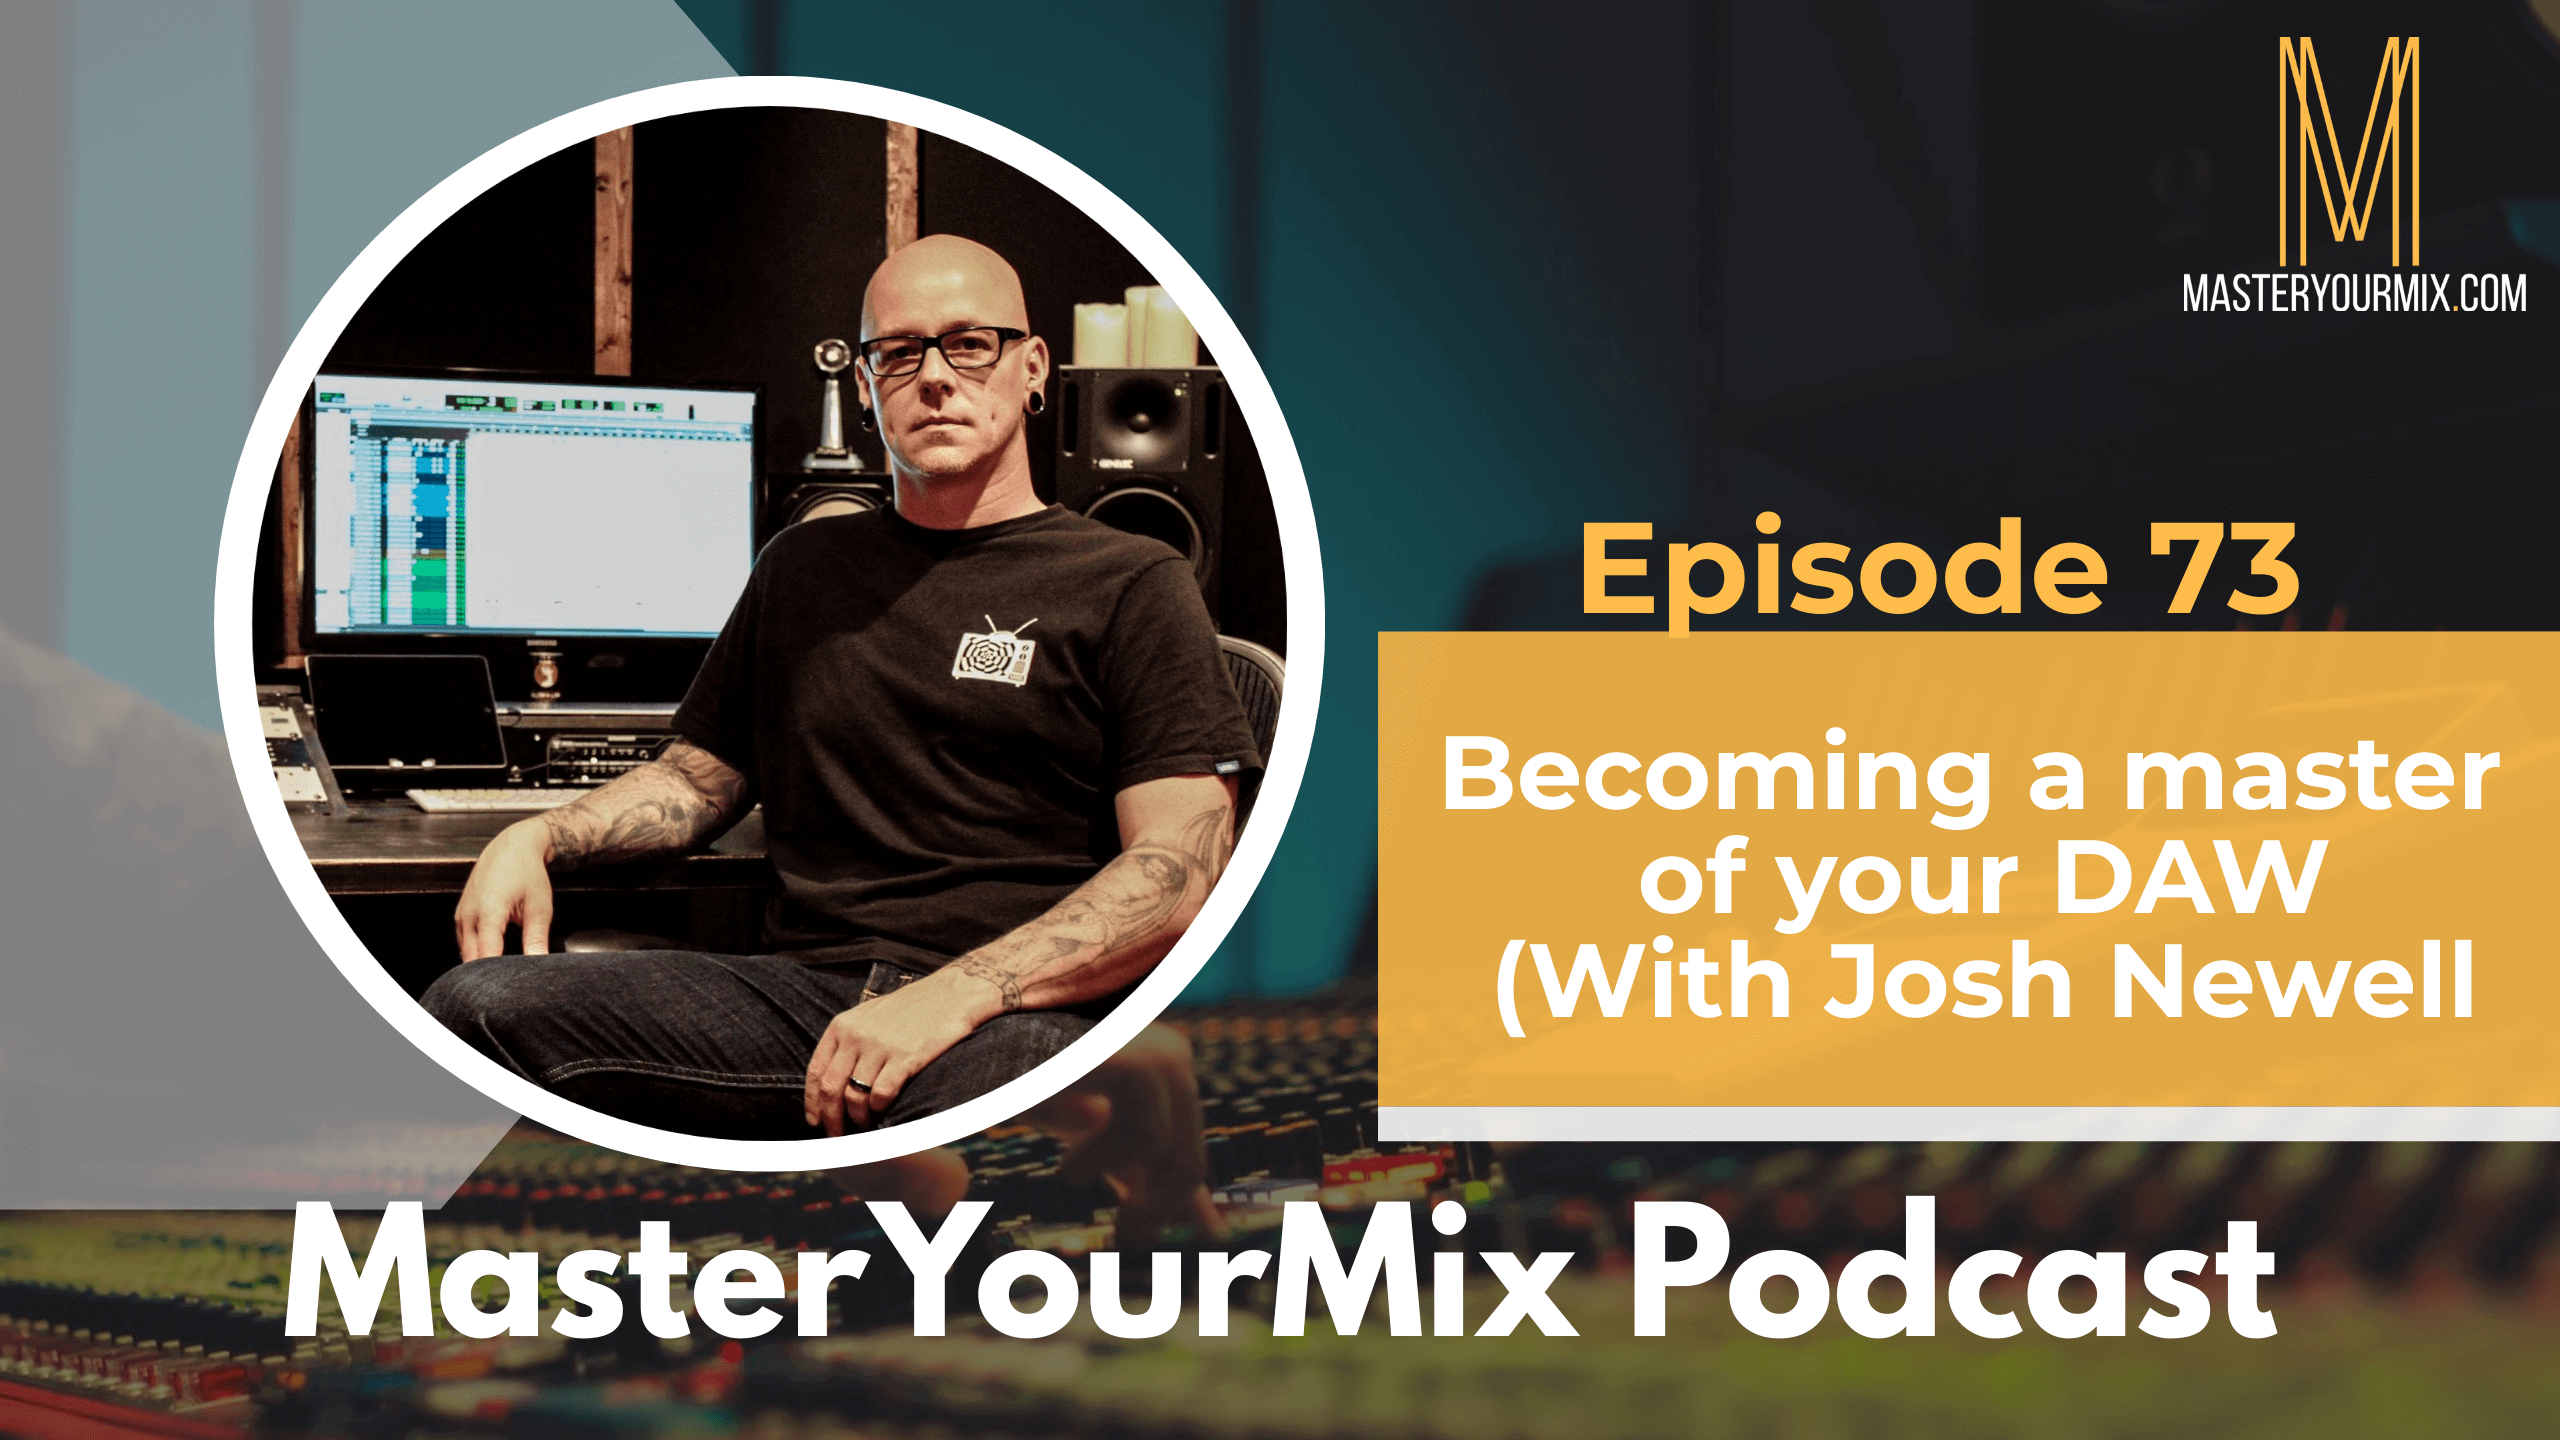 master your mix podcast, ep 73 josh newell